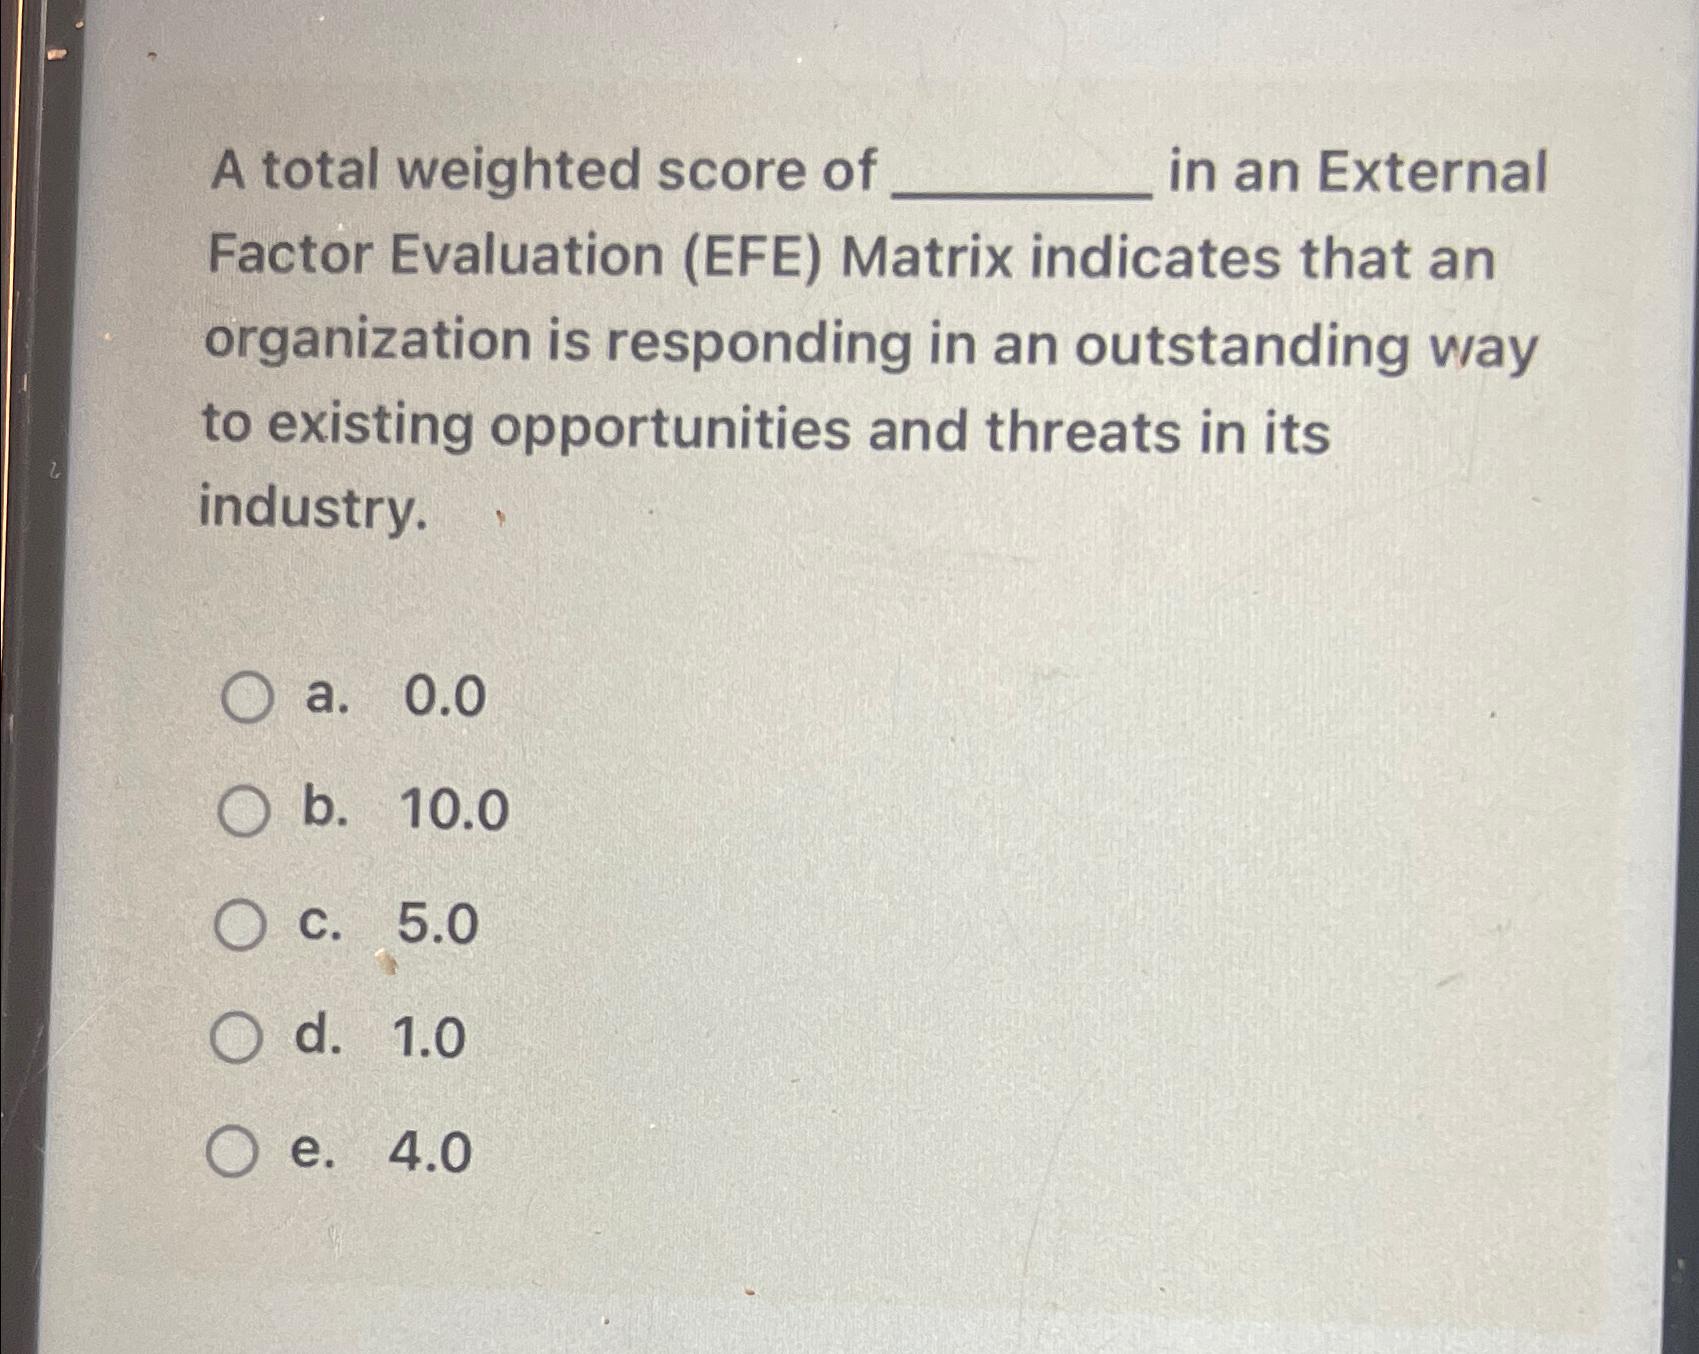 A total weighted score of in an External Factor Evaluation (EFE) Matrix indicates that an organization is